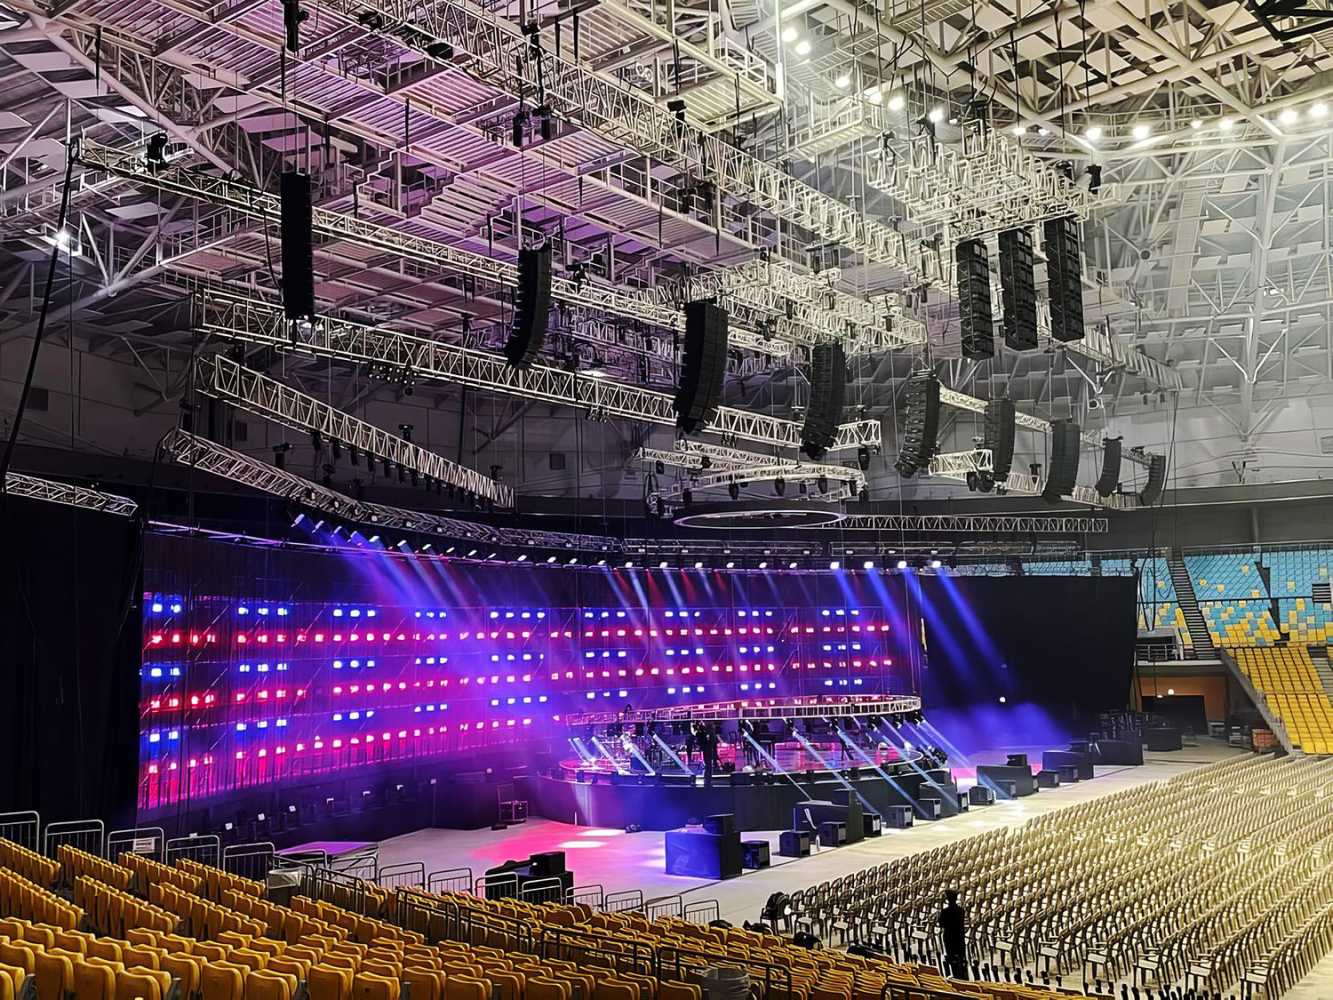 The concerts were staged in the 15,000 capacity KSPO Dome in Seoul